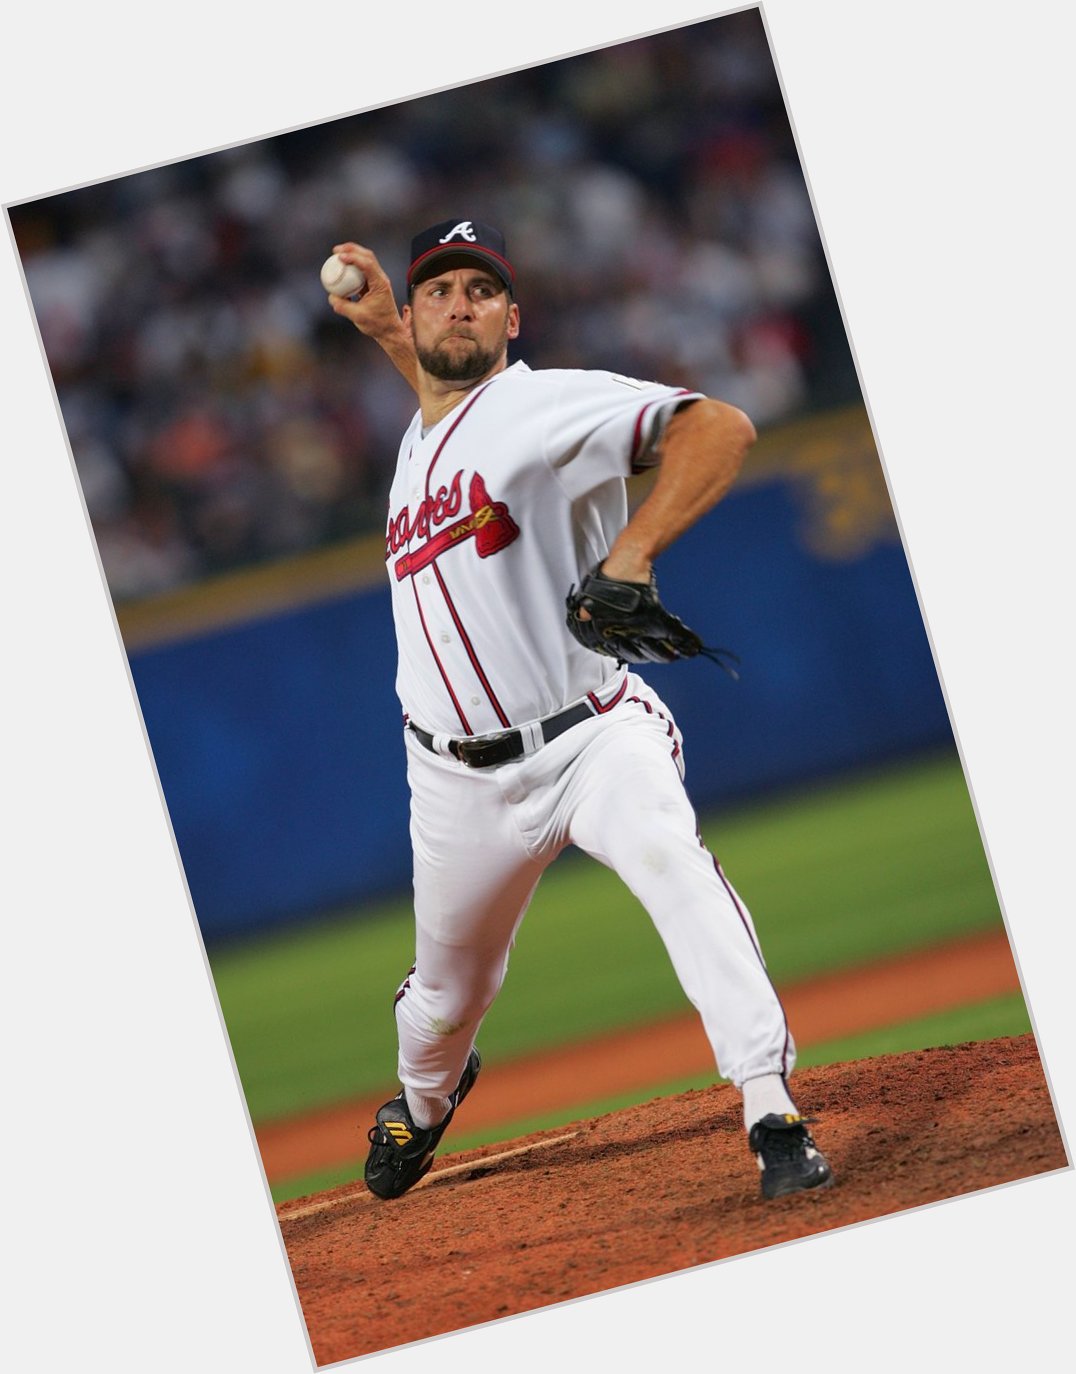 Happy birthday, John Smoltz!

Smoltz is the only pitcher in history to record 200+ wins & 150+ saves. 